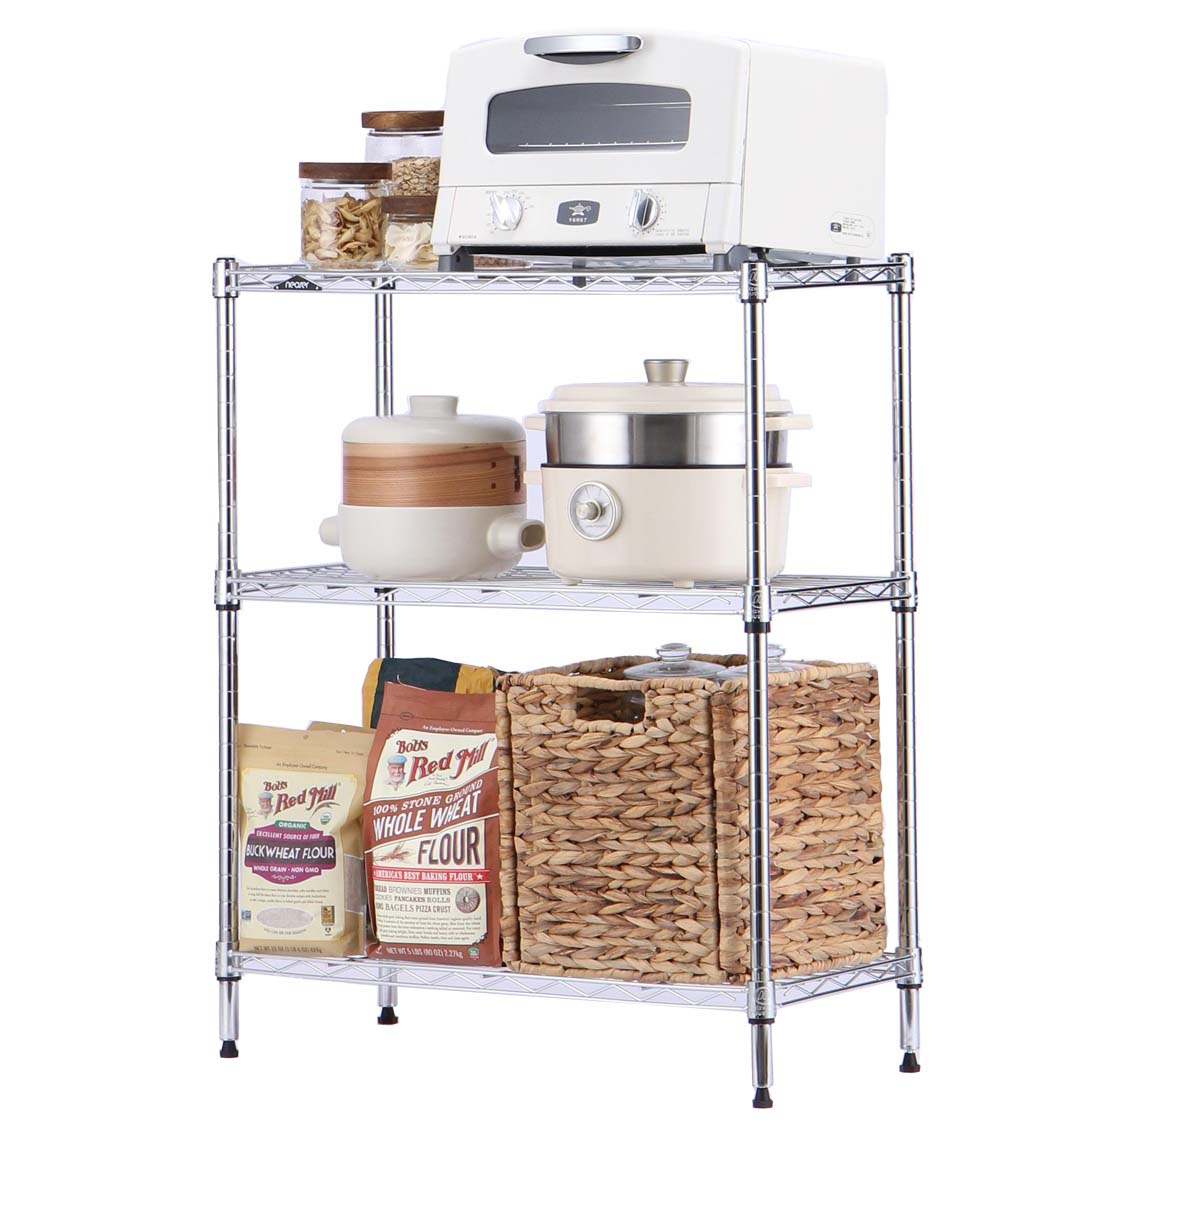 3-Tier Adjustable Microwave Stand With Storage / Steel Organizer Wire Rack Chrome / Wire Shelving Un